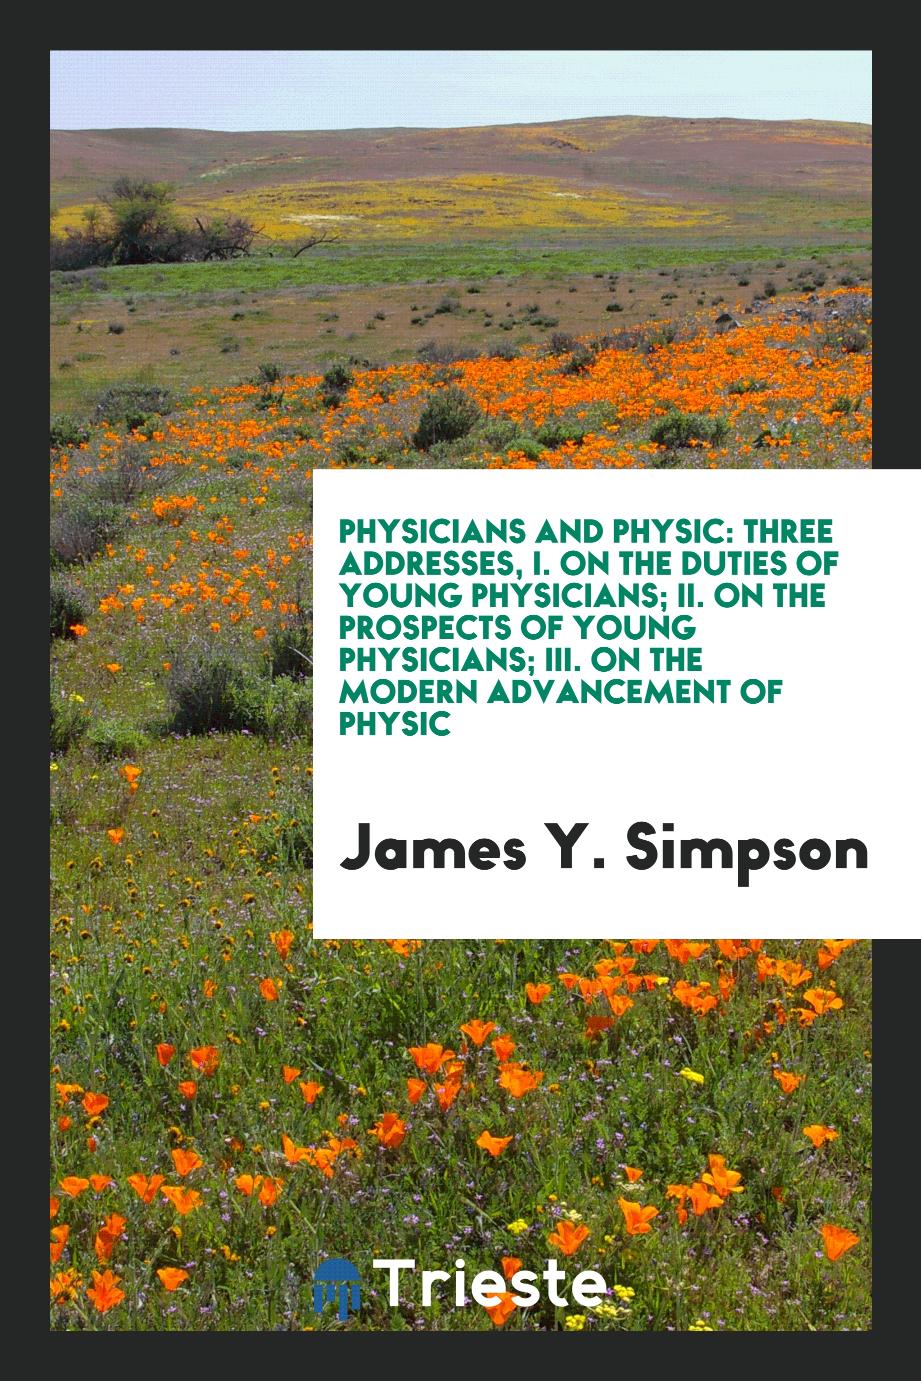 Physicians and Physic: Three Addresses, I. On the Duties of Young Physicians; II. On the Prospects of Young Physicians; III. On the Modern Advancement of Physic